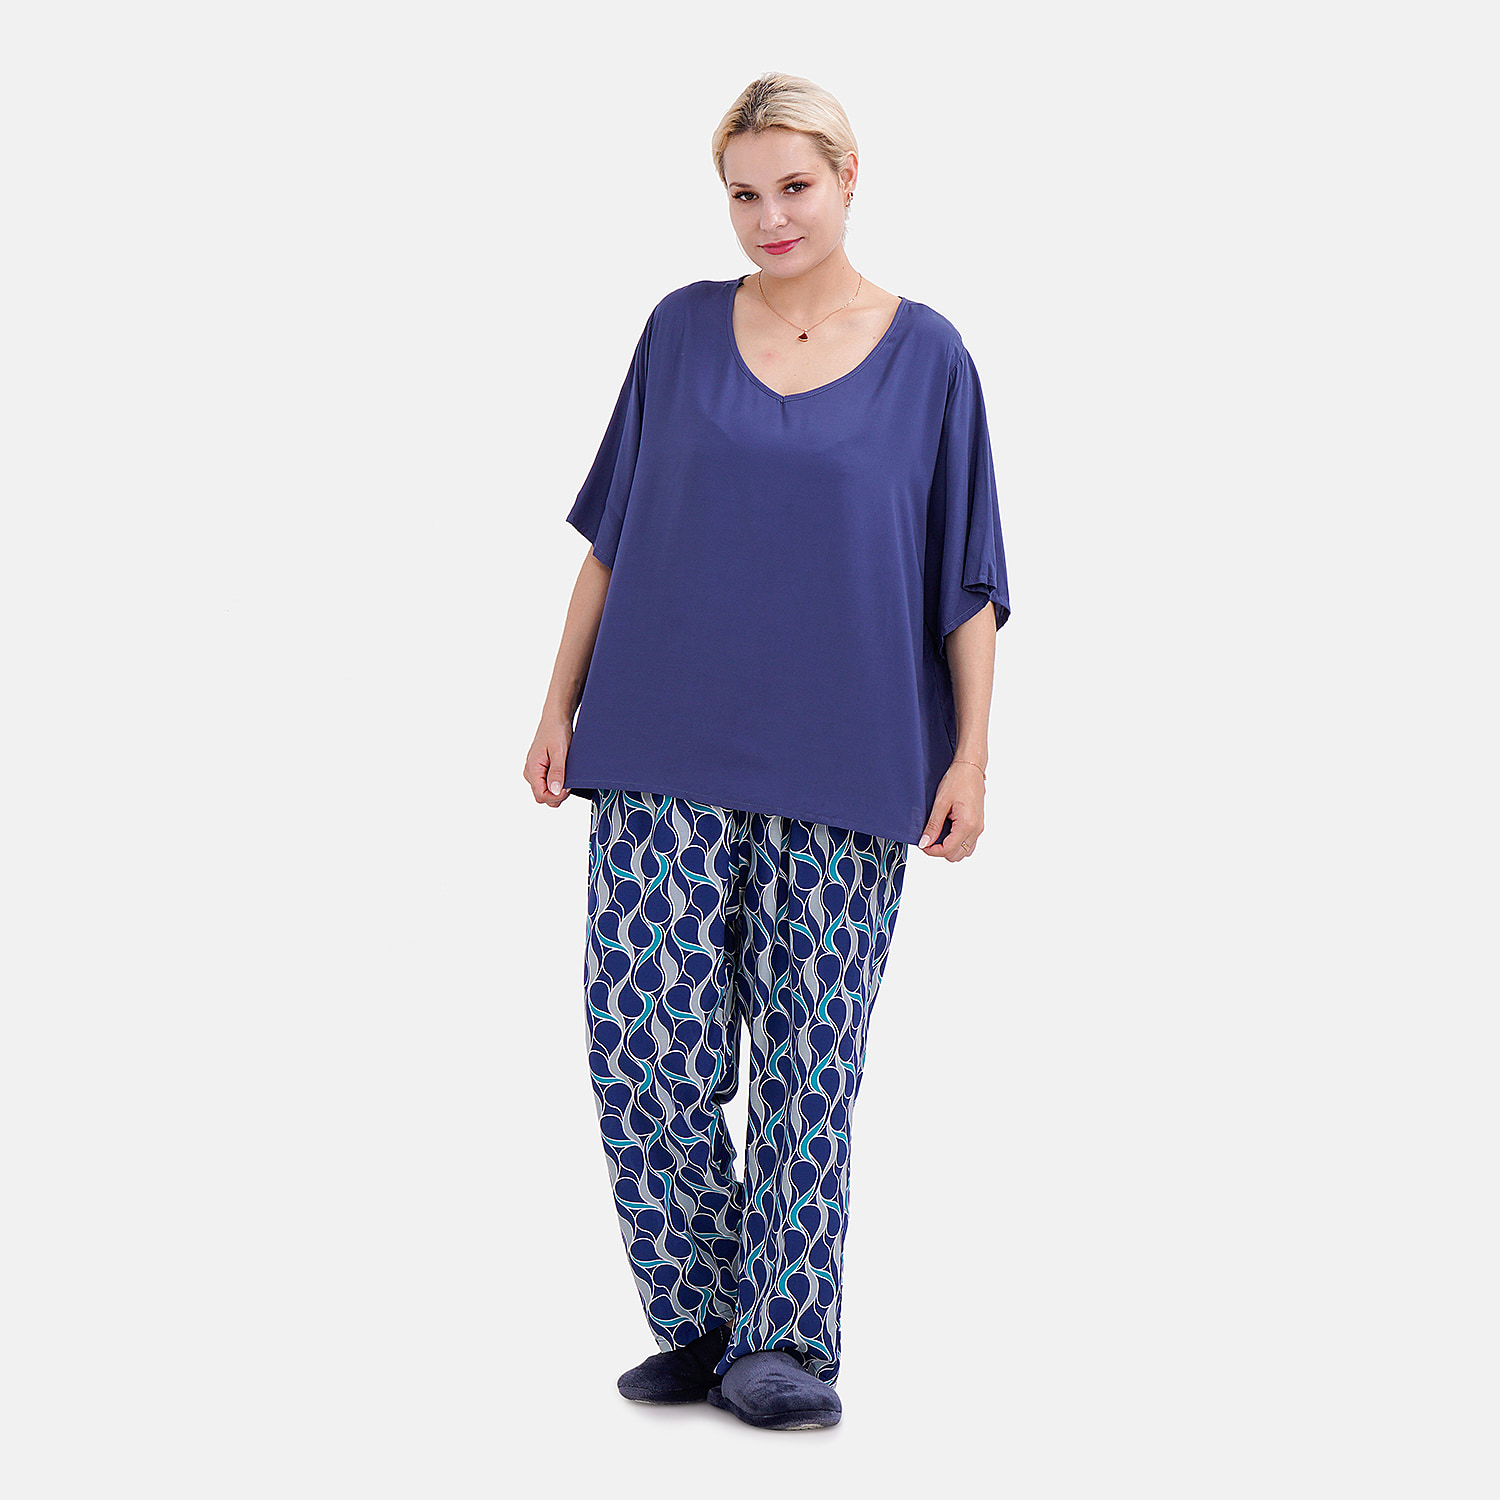 LA MAREY Loungewear Sets (Short Sleeves Top with Printed Trousers) - Dark Blue (Size S)